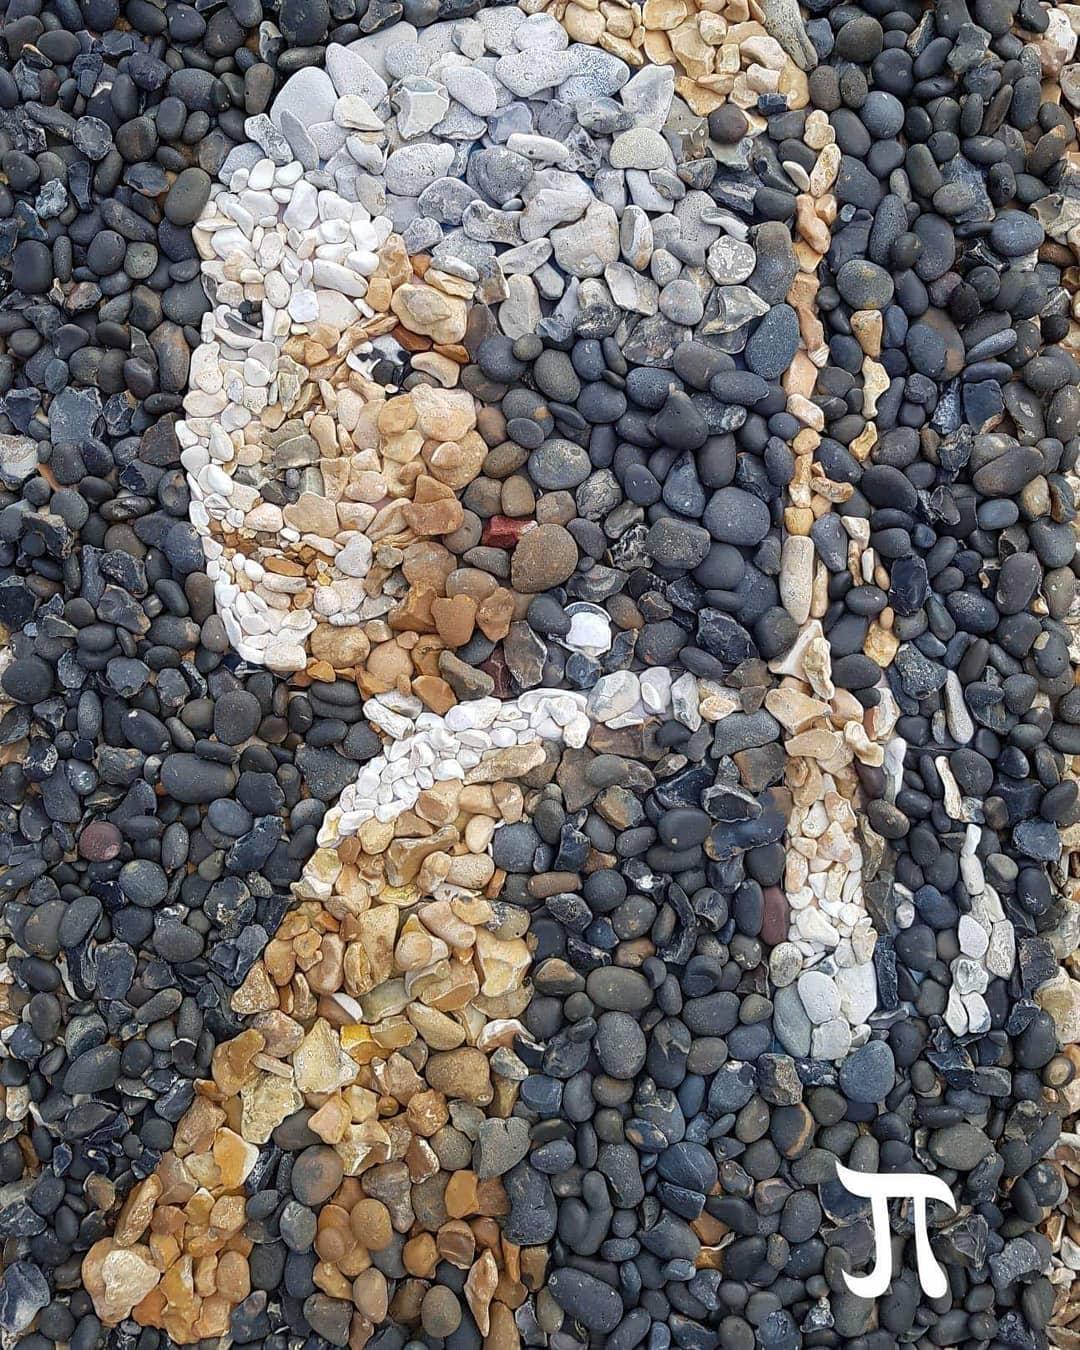 A painting in rock after Vermeer's Girl with the Pearl Earring. (Courtesy of <a href="https://www.facebook.com/justin.bateman1">Justin Bateman</a> and <a href="https://www.instagram.com/pebblepicassos/">@pebblepicassos</a>)